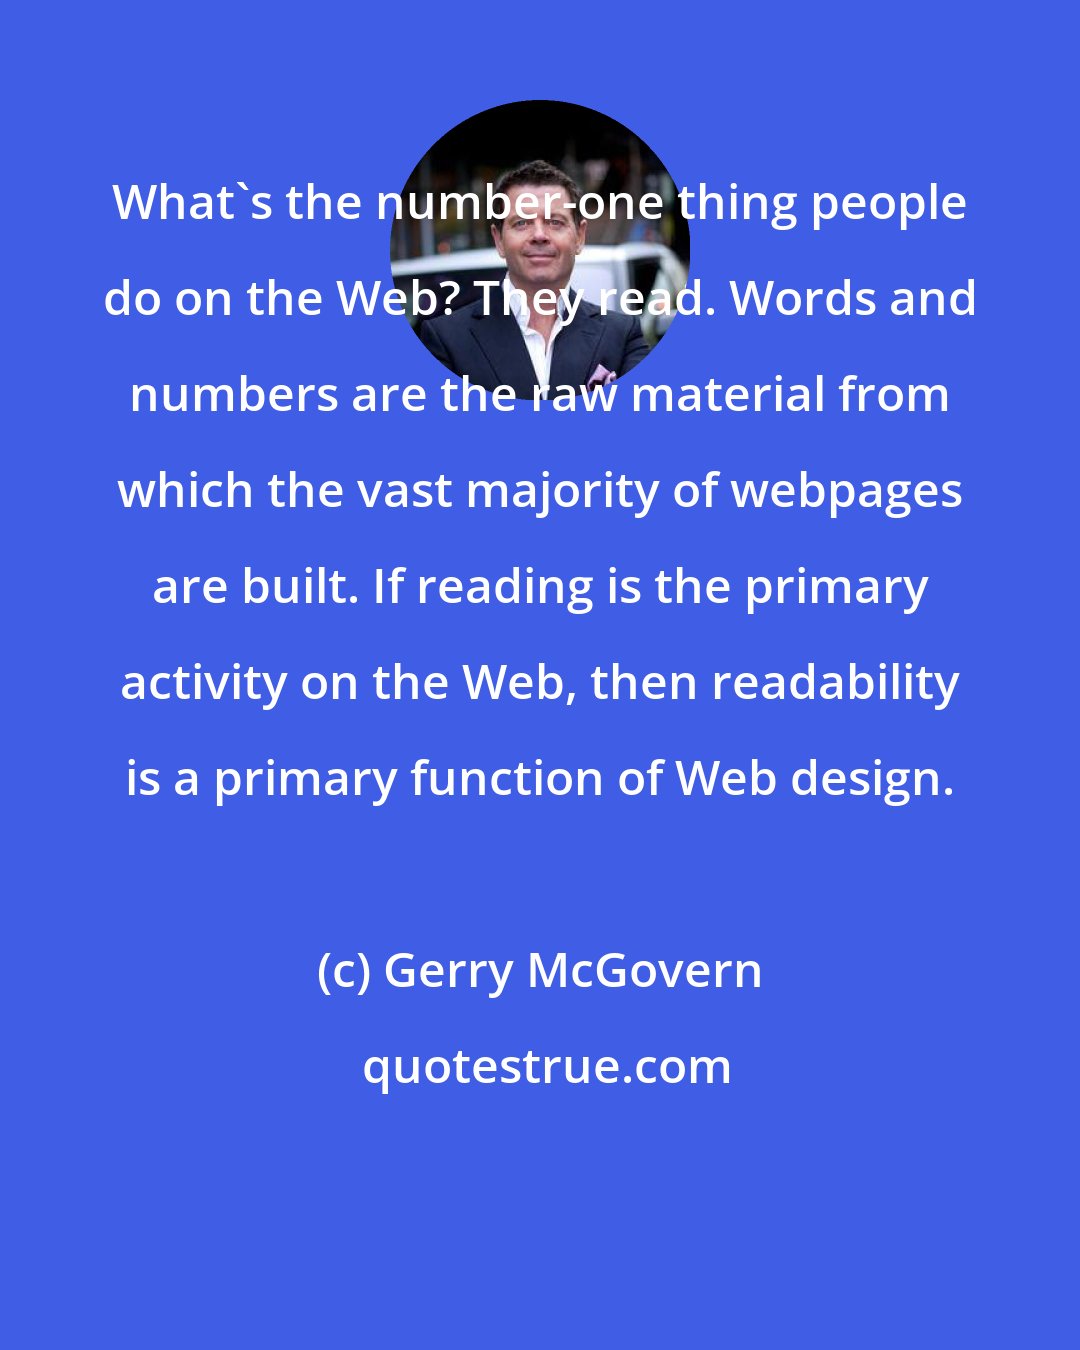 Gerry McGovern: What's the number-one thing people do on the Web? They read. Words and numbers are the raw material from which the vast majority of webpages are built. If reading is the primary activity on the Web, then readability is a primary function of Web design.